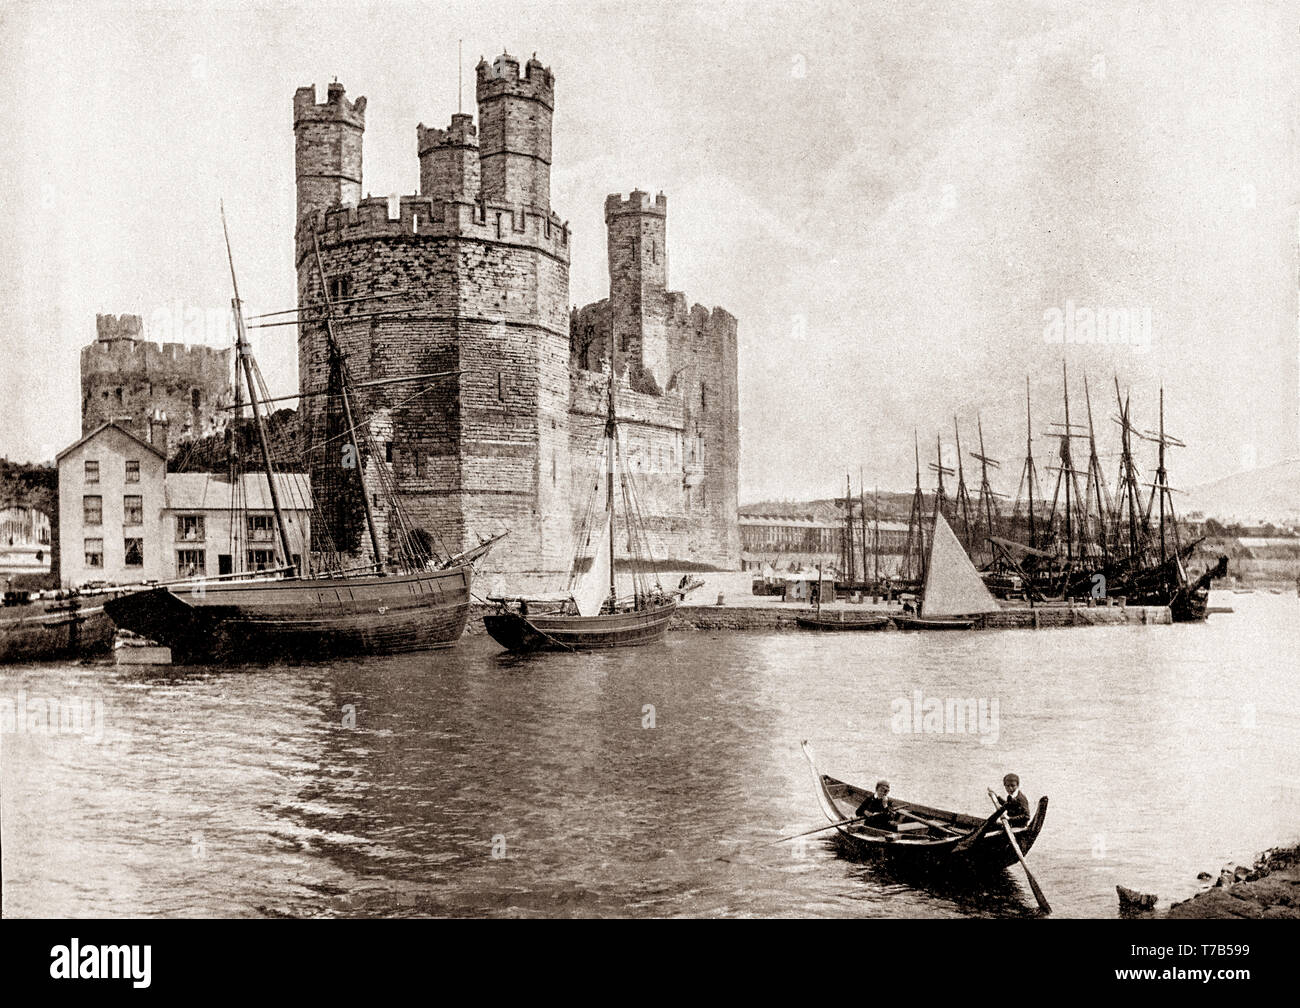 A late 19th Century view of two young boys rowing across the harbour to the  13th Century castle in Caernarfon, royal town and port in Gwynedd, Wales on the eastern shore of the Menai Strait, opposite the Isle of Anglesey. Caernarfon castle, constructed between 1283 and 1330 by order of King Edward I, stands at the mouth of the River Seiont which creates a natural harbour where it flows into the Menai Strait. Stock Photo